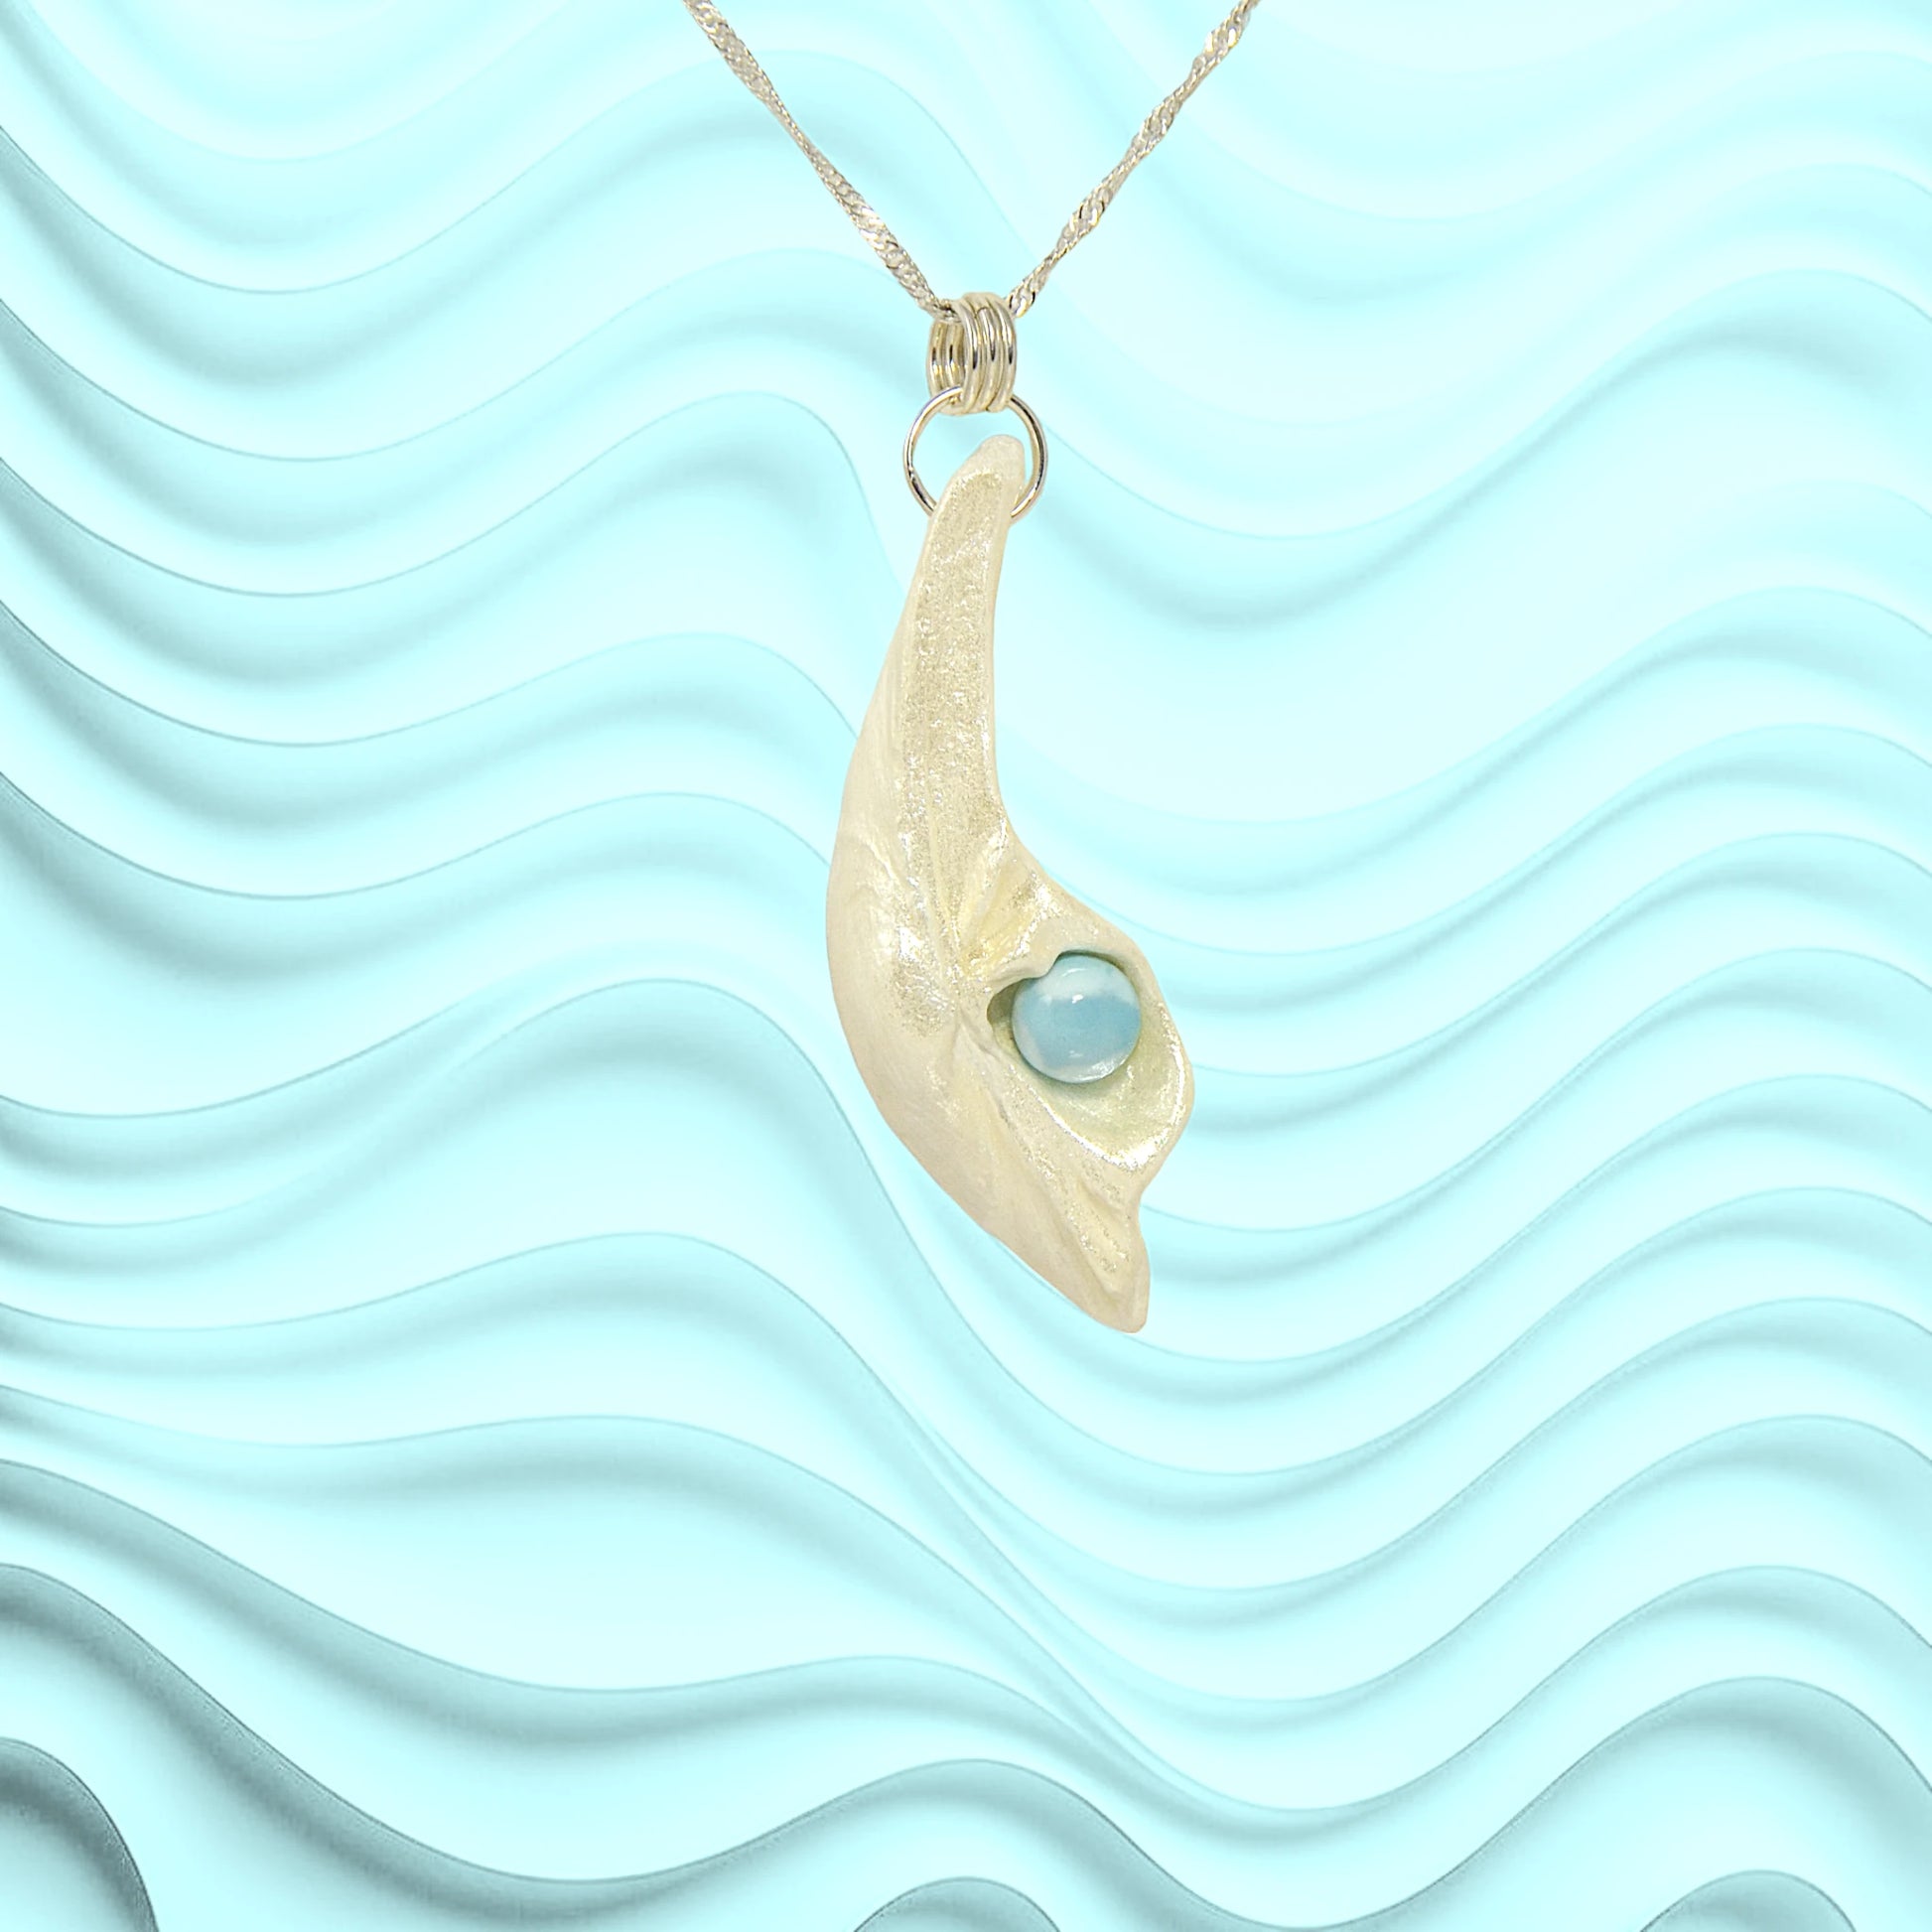 Larimar Moon Natural seashell a beautiful 10 mm Round Larimar Gemstone compliments the pendant.  A wavy blue background.